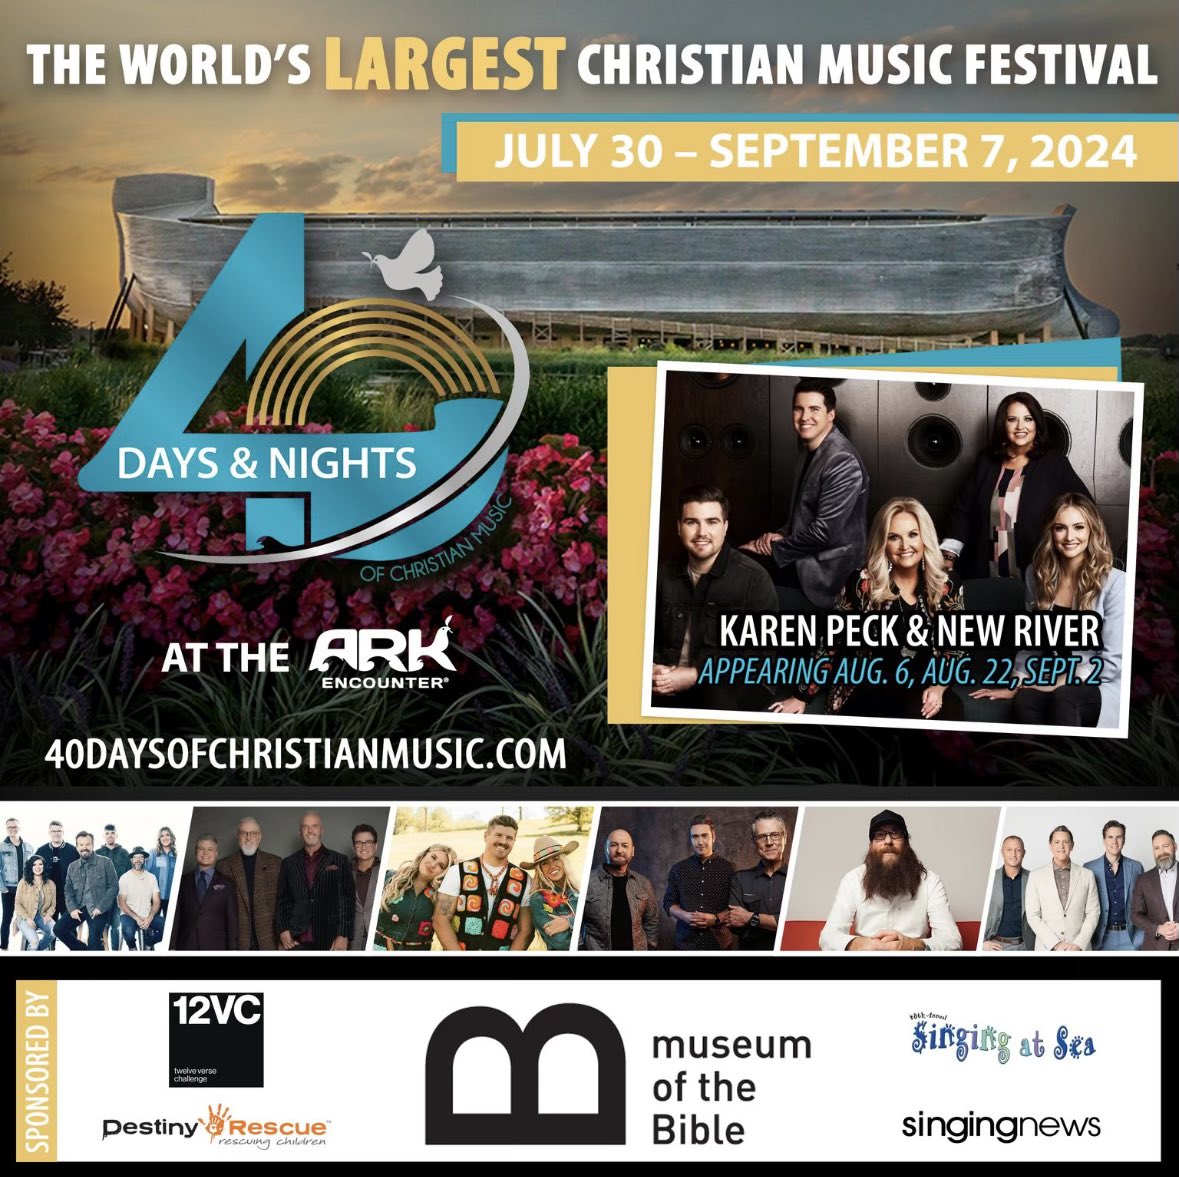 We want you to join us at @ArkEncounter July 30-Sept.7. It will be fantastic!
Sponsored by: @museumofBible @destinyrescue @Illuminations12VerseChallenge @CreationMuseum @singingnews Singing at Sea @abrahamprod @ArkEncounter